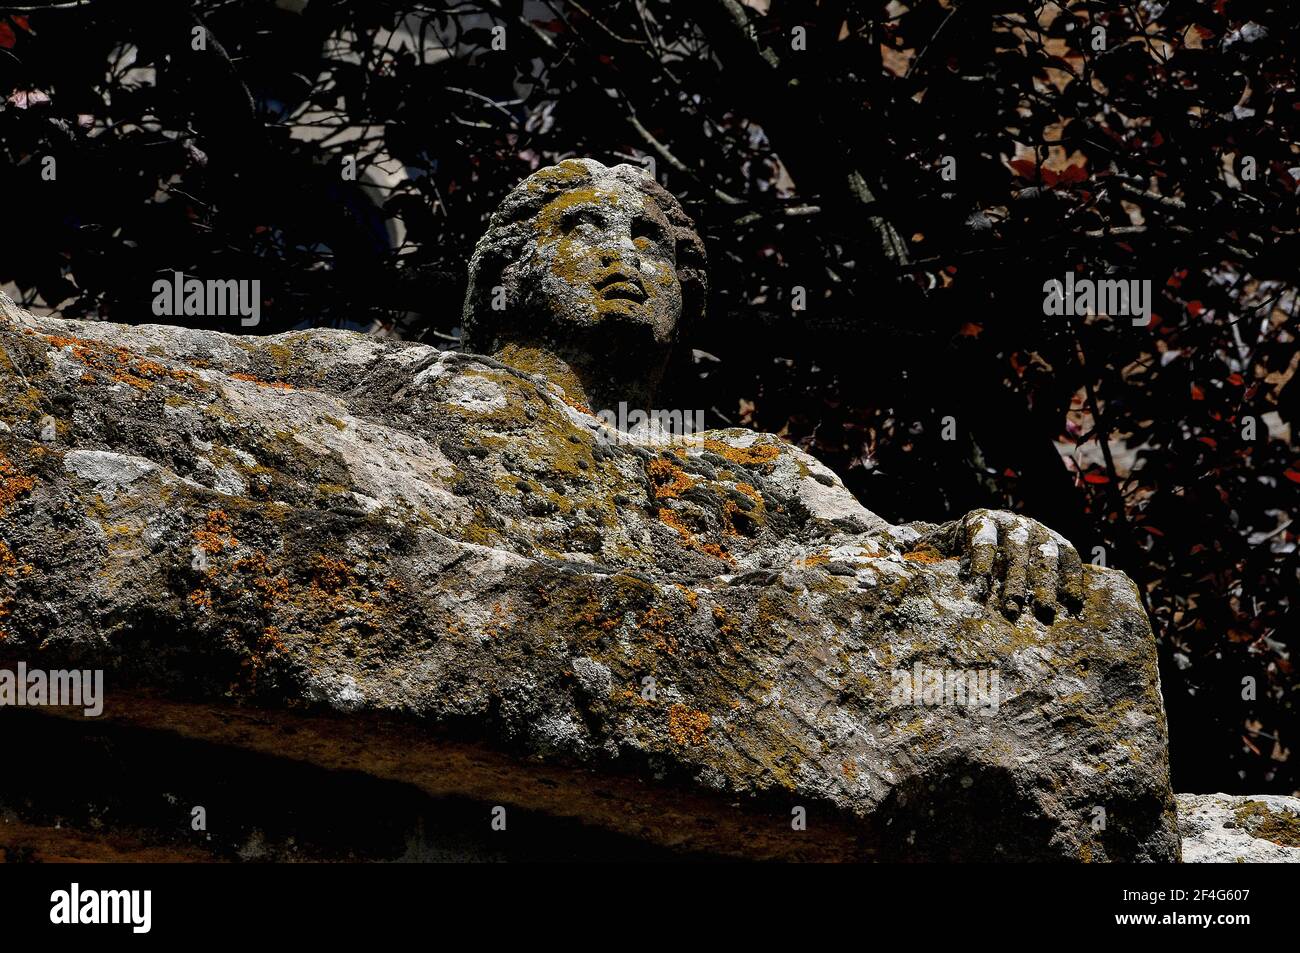 This lichen-encrusted face of an Etruscan citizen, looking up to the sky from the Giardini Comunale or public gardens at Tuscania, Lazio, Italy, is among many lifelike public portrayals of the people who lived in ancient Tuscana.  Their remains were interred in stone sarcophagi in vast necropoli or cemeteries in and around the settlement.  From the late-1800s, many of these effigies, sculpted on the lids of their tomb chests, were re-used as distinctive urban furniture and public art in the streets of Tuscania. Stock Photo